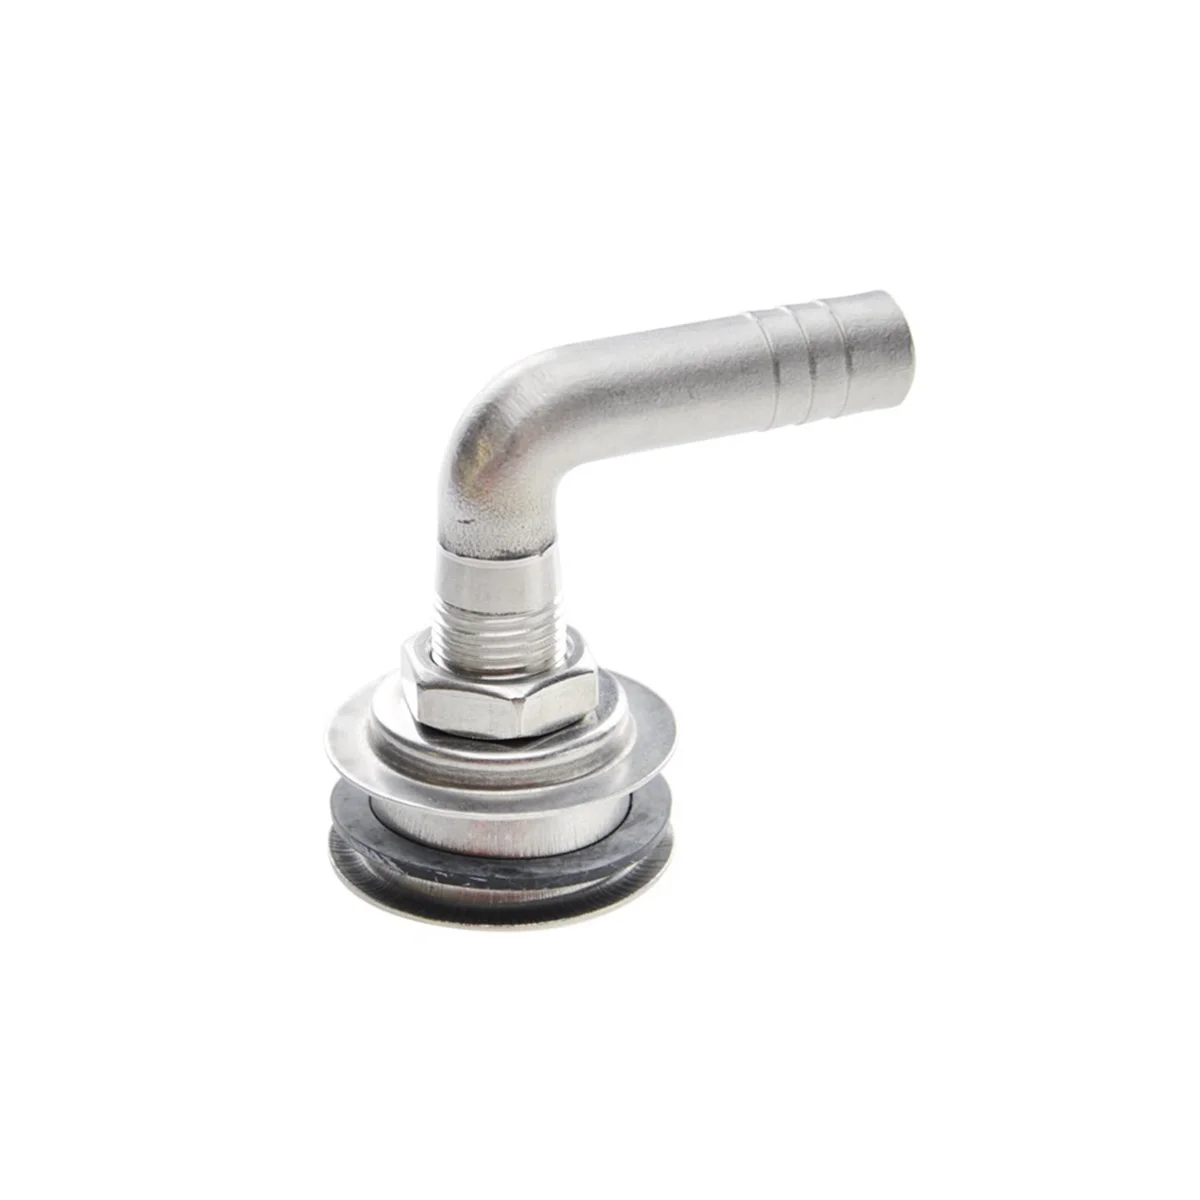 

Marine M16 Air Vent, Ventilation Exhaust, Air Outlet, Pipe Bolt 90°Elbow with Bowl, Stainless Steel Hardware Accessories